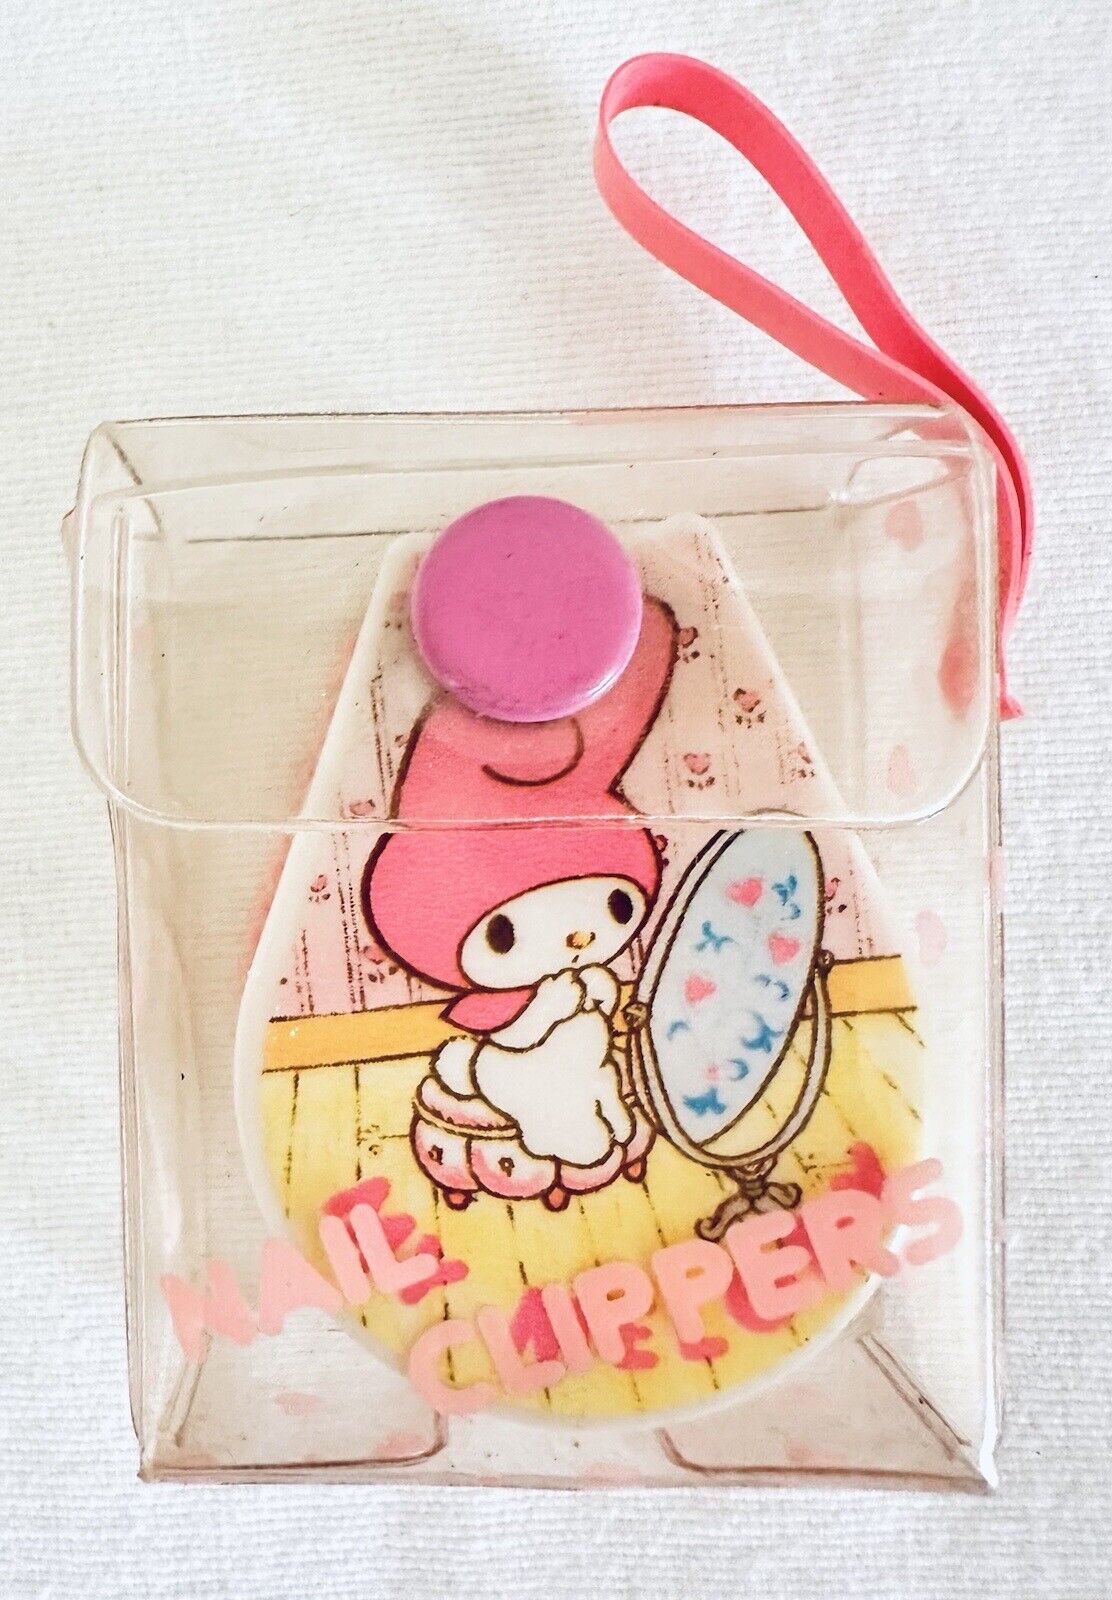 Vintage Sanrio My Melody Nail Clippers w/ Case RARE